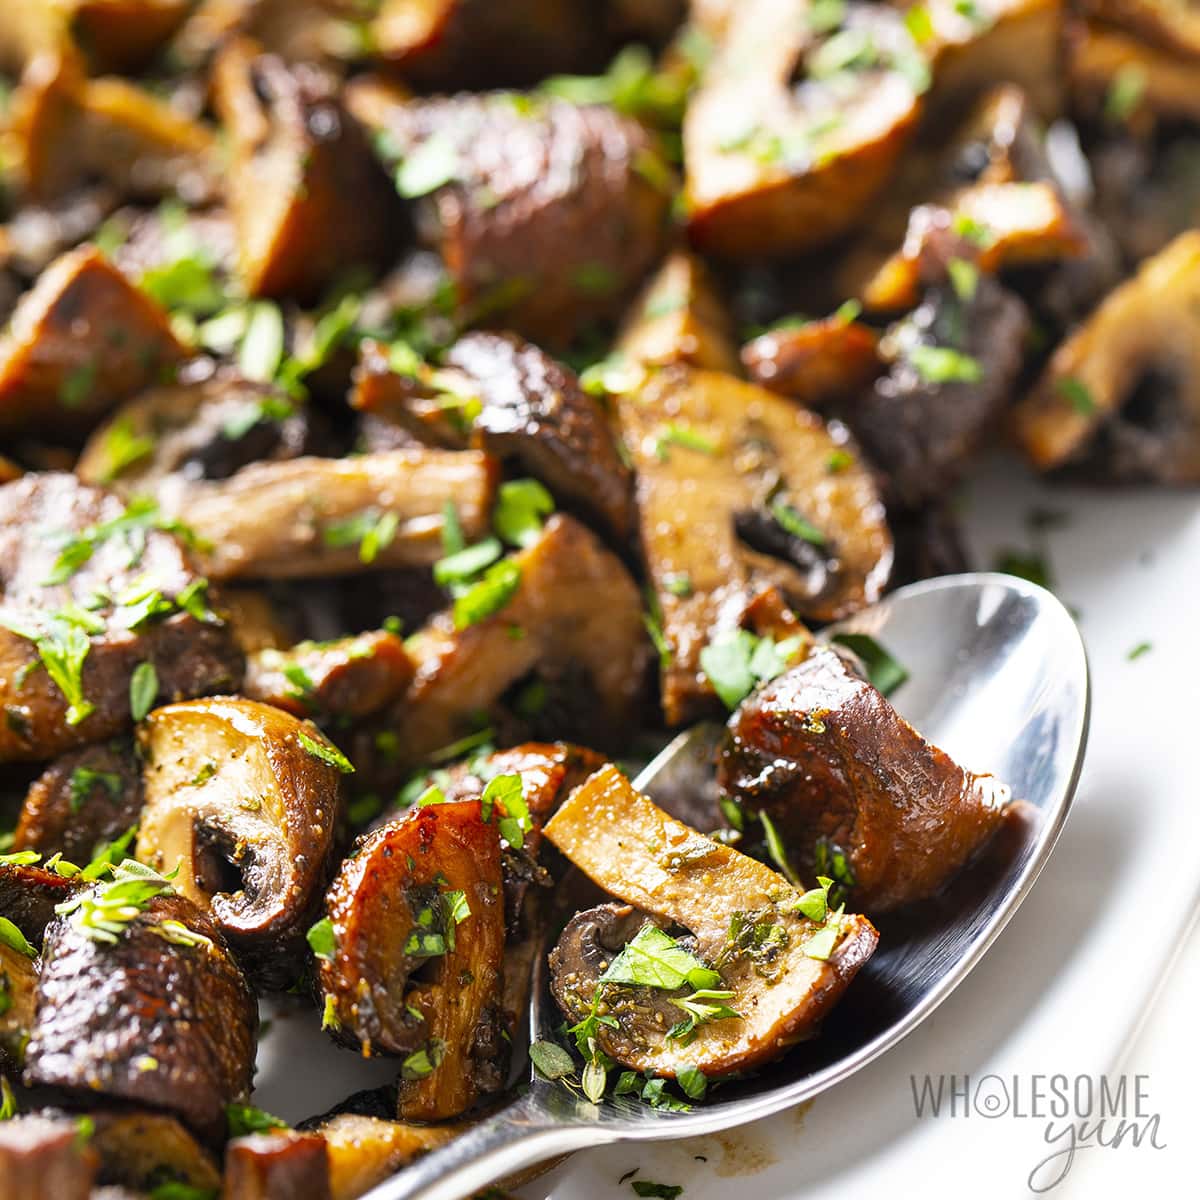 Oven roasted mushrooms with balsamic with spoon.